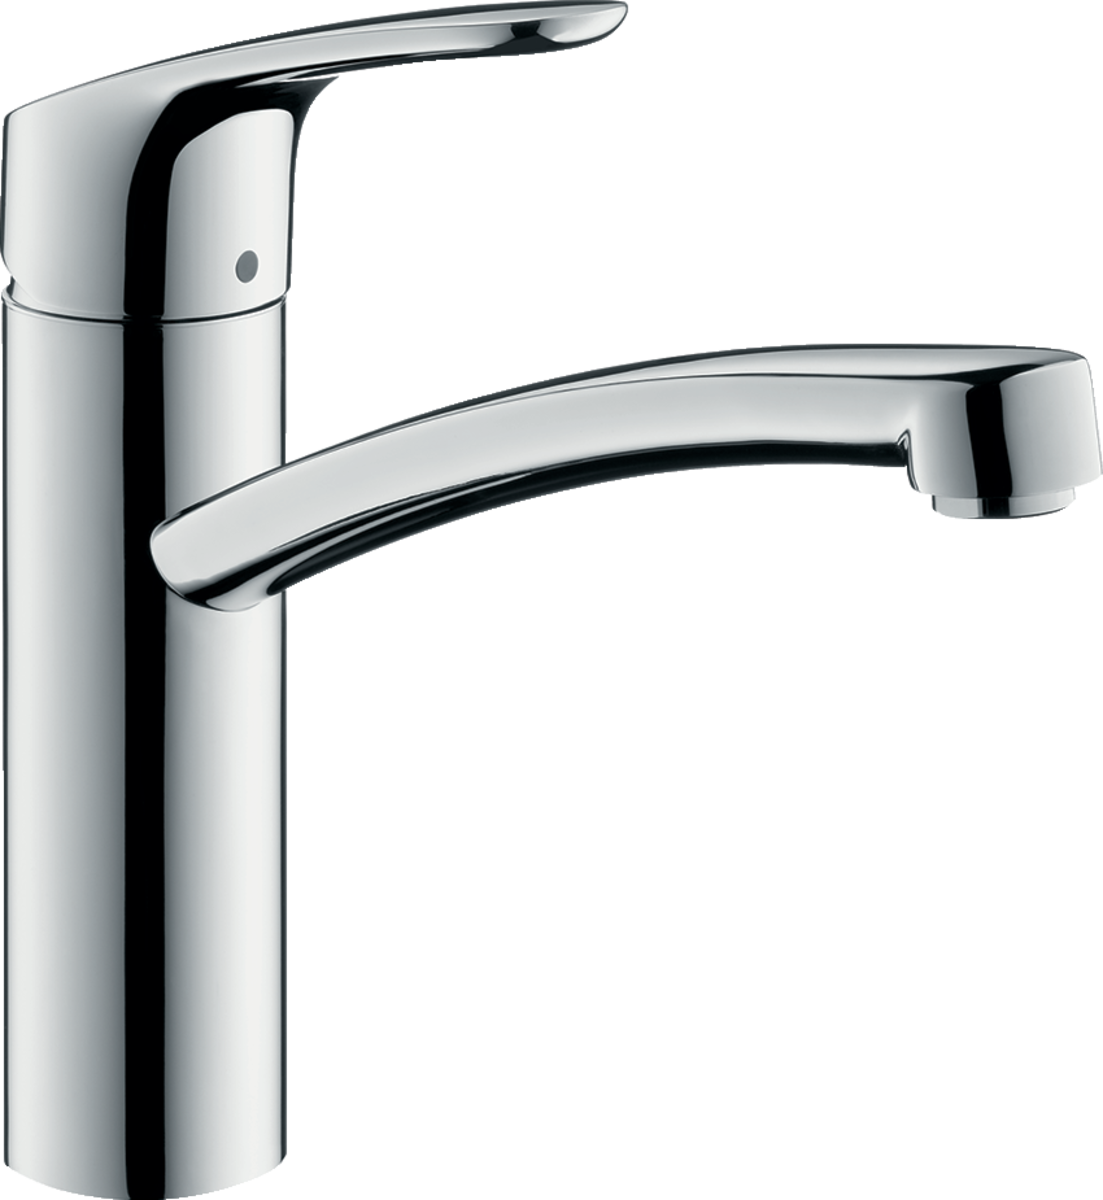 Picture of HANSGROHE Focus M41 Single lever kitchen mixer 160, LowPressure/vented hot water cylinders, 1jet #31804000 - Chrome